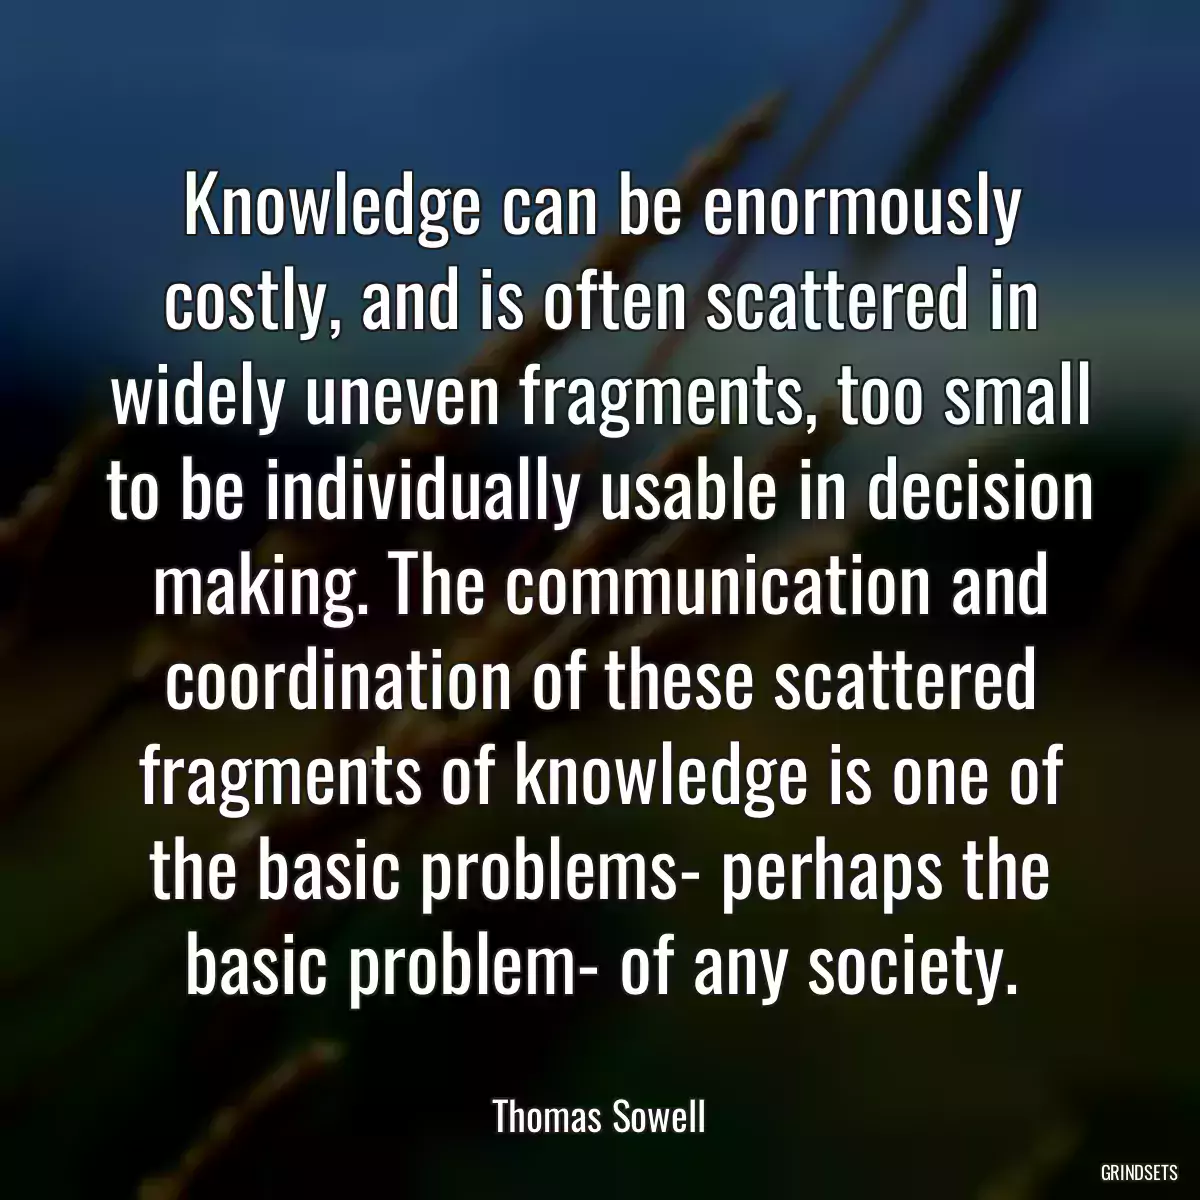 Knowledge can be enormously costly, and is often scattered in widely uneven fragments, too small to be individually usable in decision making. The communication and coordination of these scattered fragments of knowledge is one of the basic problems- perhaps the basic problem- of any society.